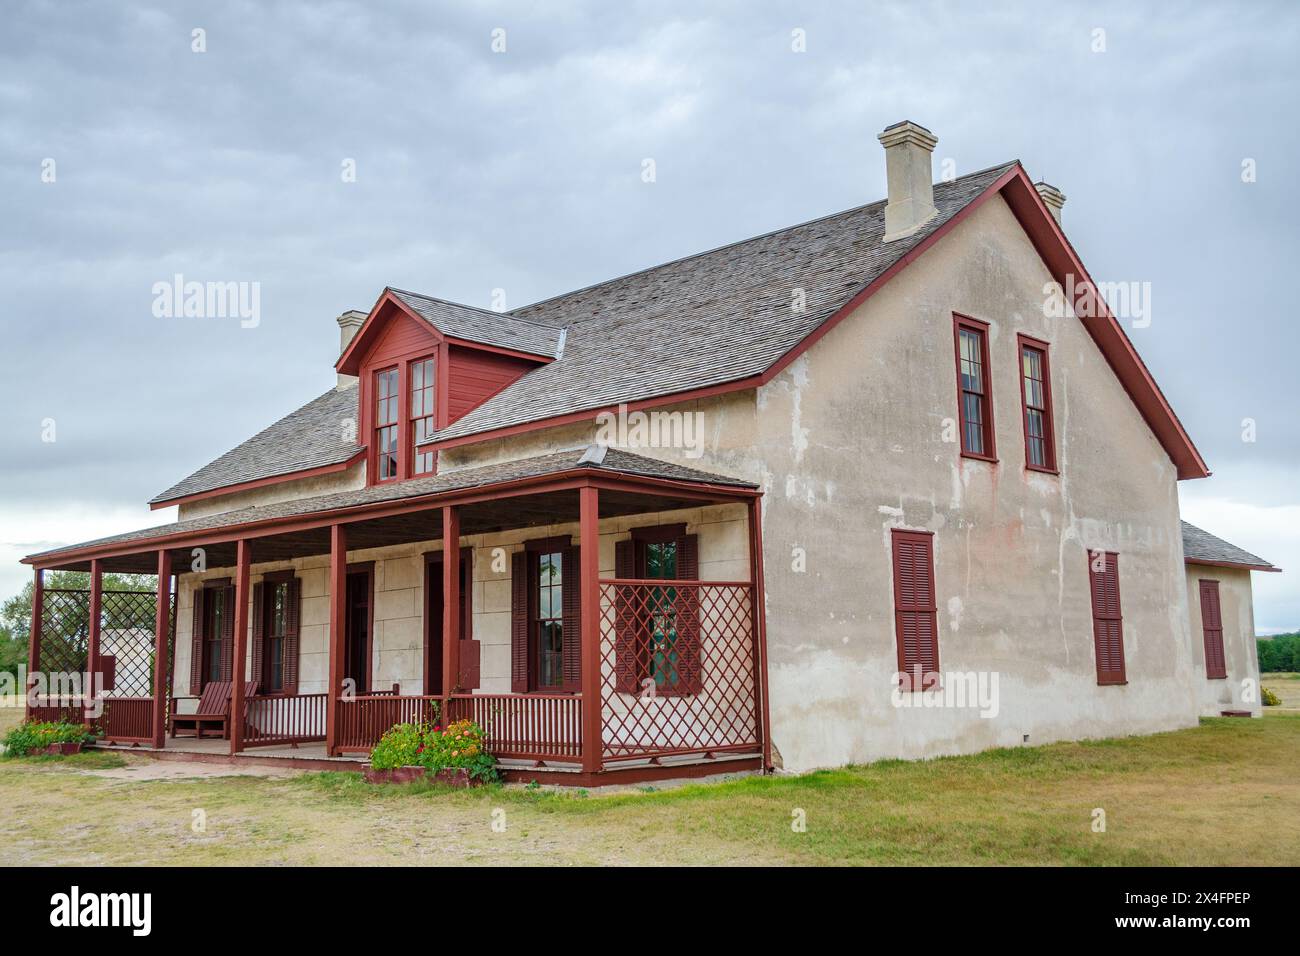 Fort Laramie National Historic Site, Trading Post, Diplomatic Site e Military Installation in Wyoming, USA Foto Stock